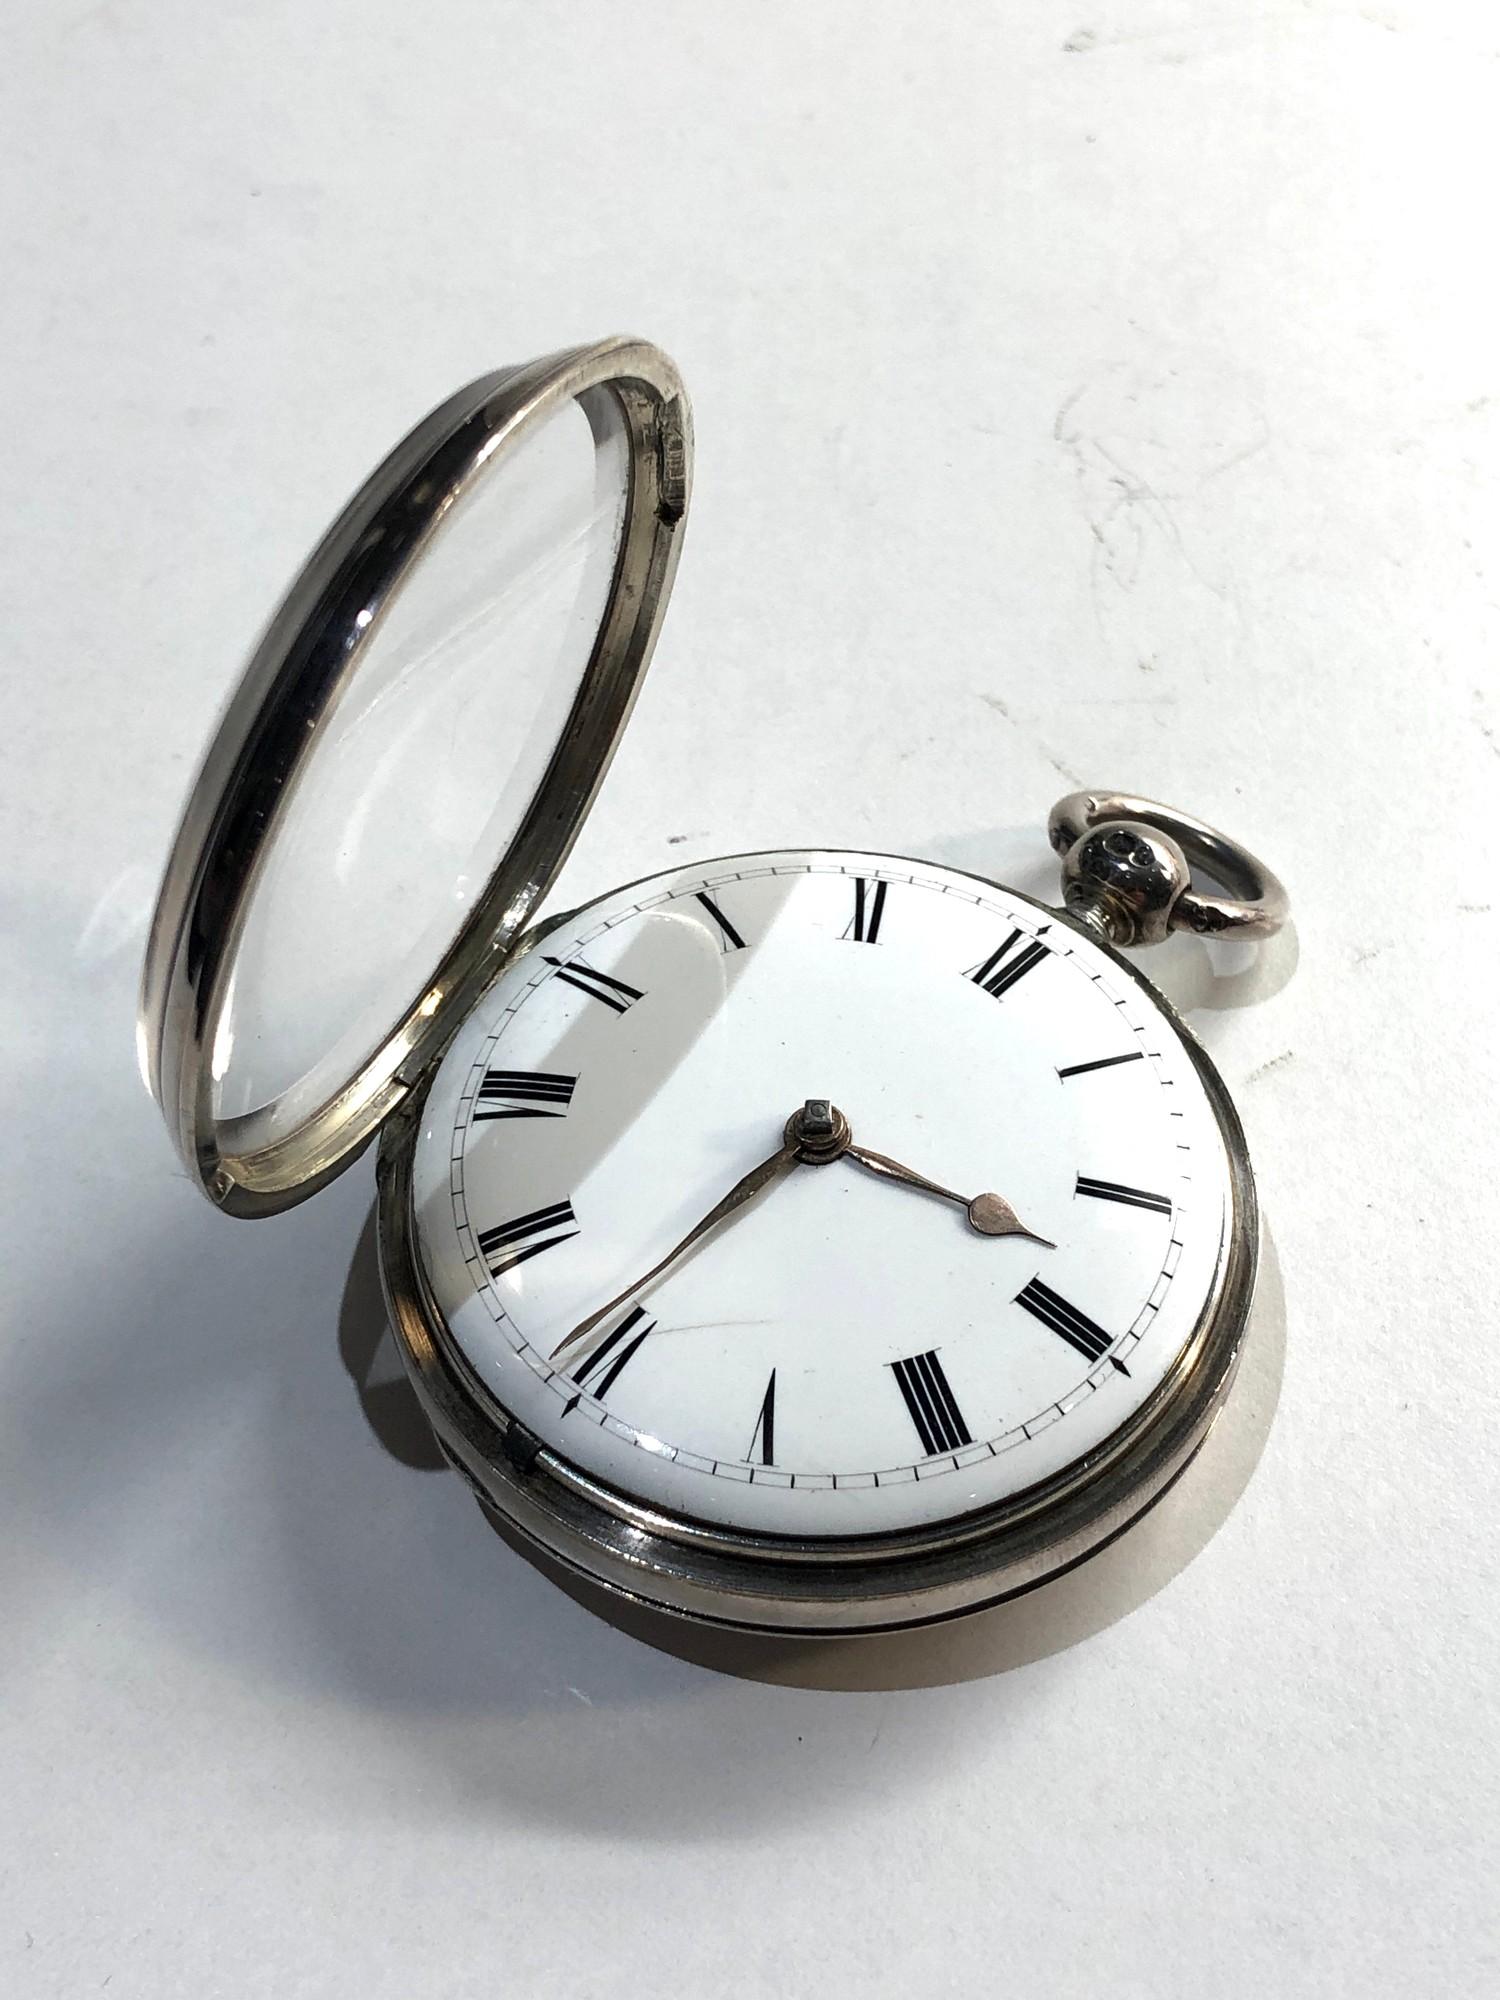 Antique silver fusee verge pocket watch by John Clements London dia end stone good overall condition